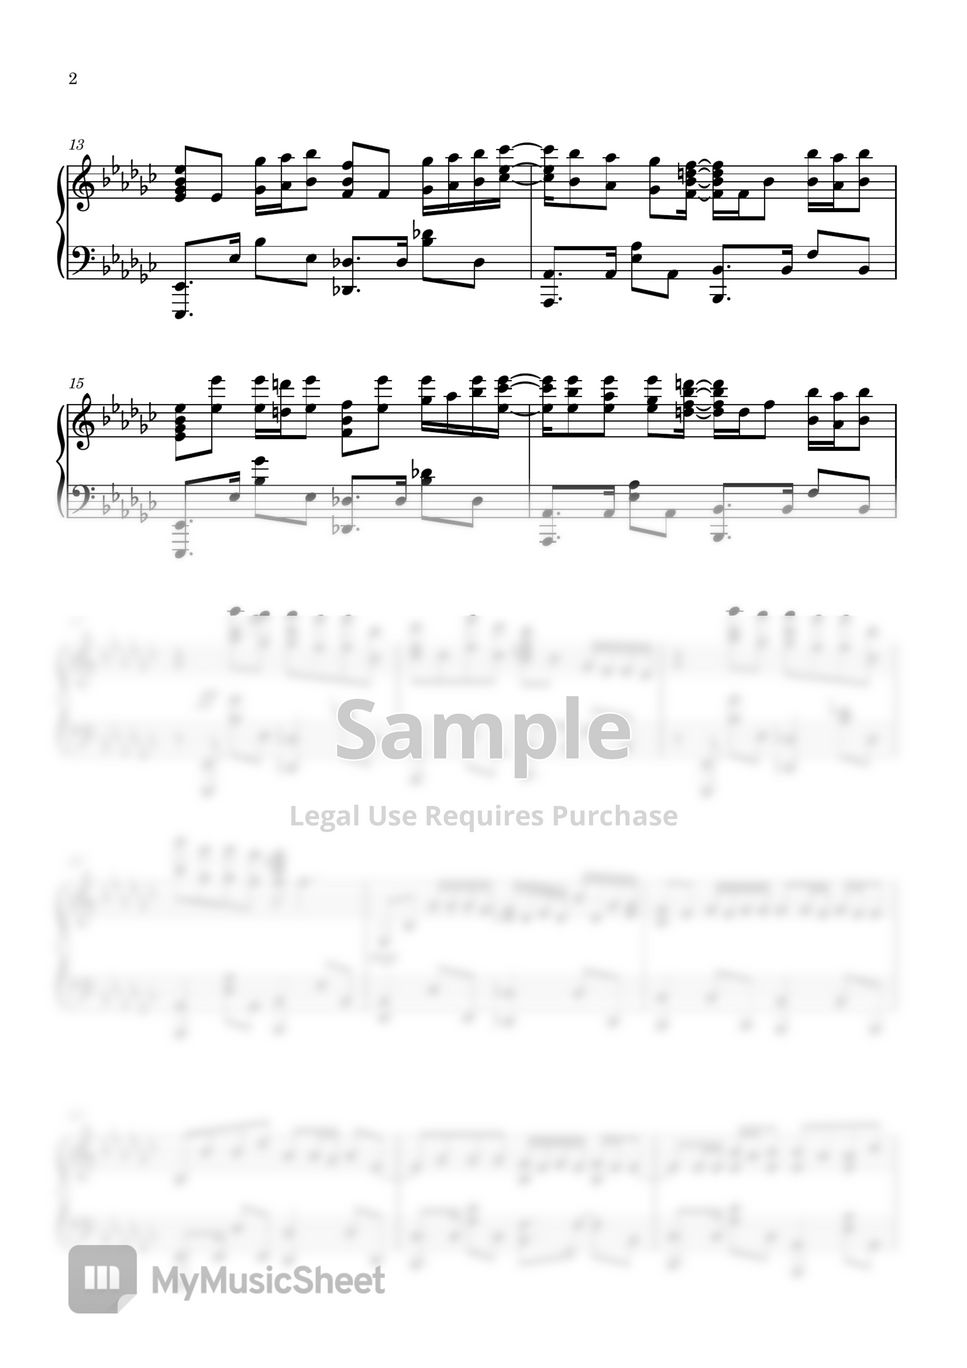 Gods – NewJeans (League of Legends Worlds 2023 Anthem) Sheet music for  Piano (Solo)